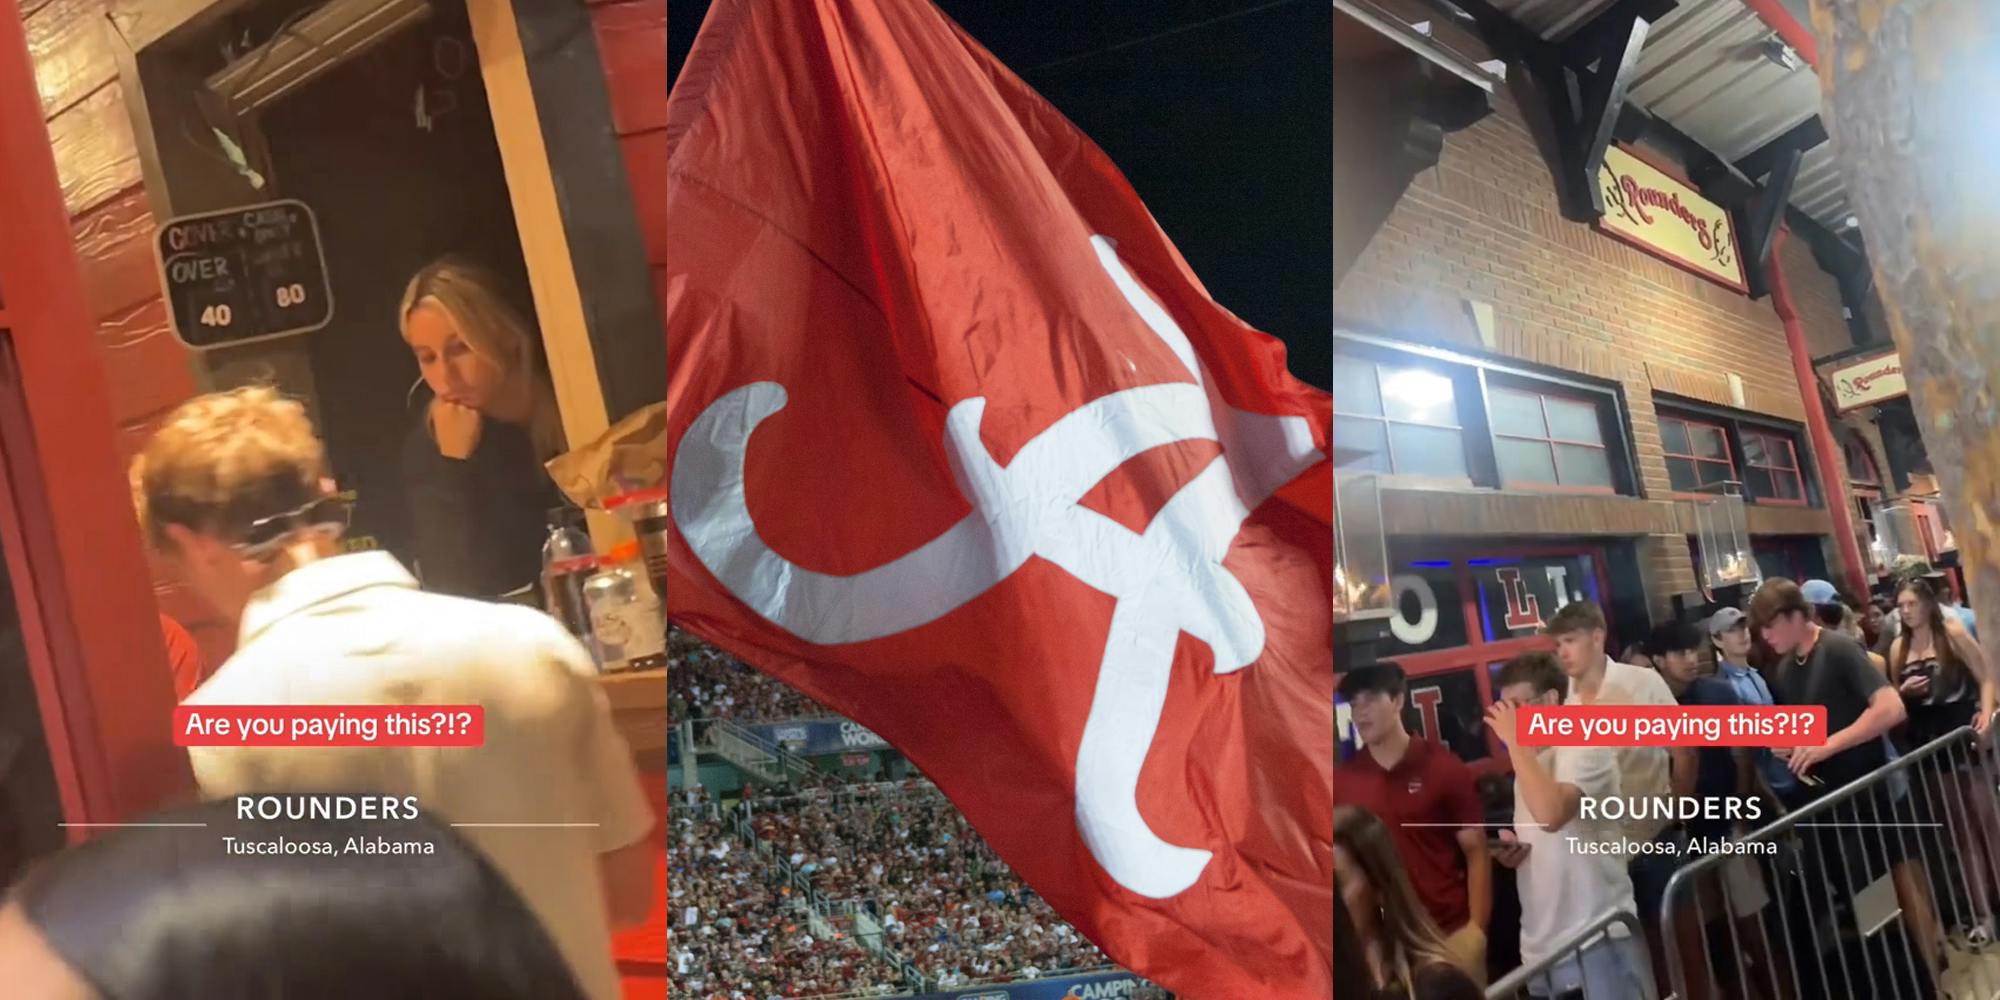 Rounders entrance with caption "Are you paying this?!? Rounders Tuscaloosa, Alabama" (l) Crimson Tide Flag -Alabama Football Campingworld Kickoff (c) Rounders entrance with caption "Are you paying this?!? Rounders Tuscaloosa, Alabama" (r)